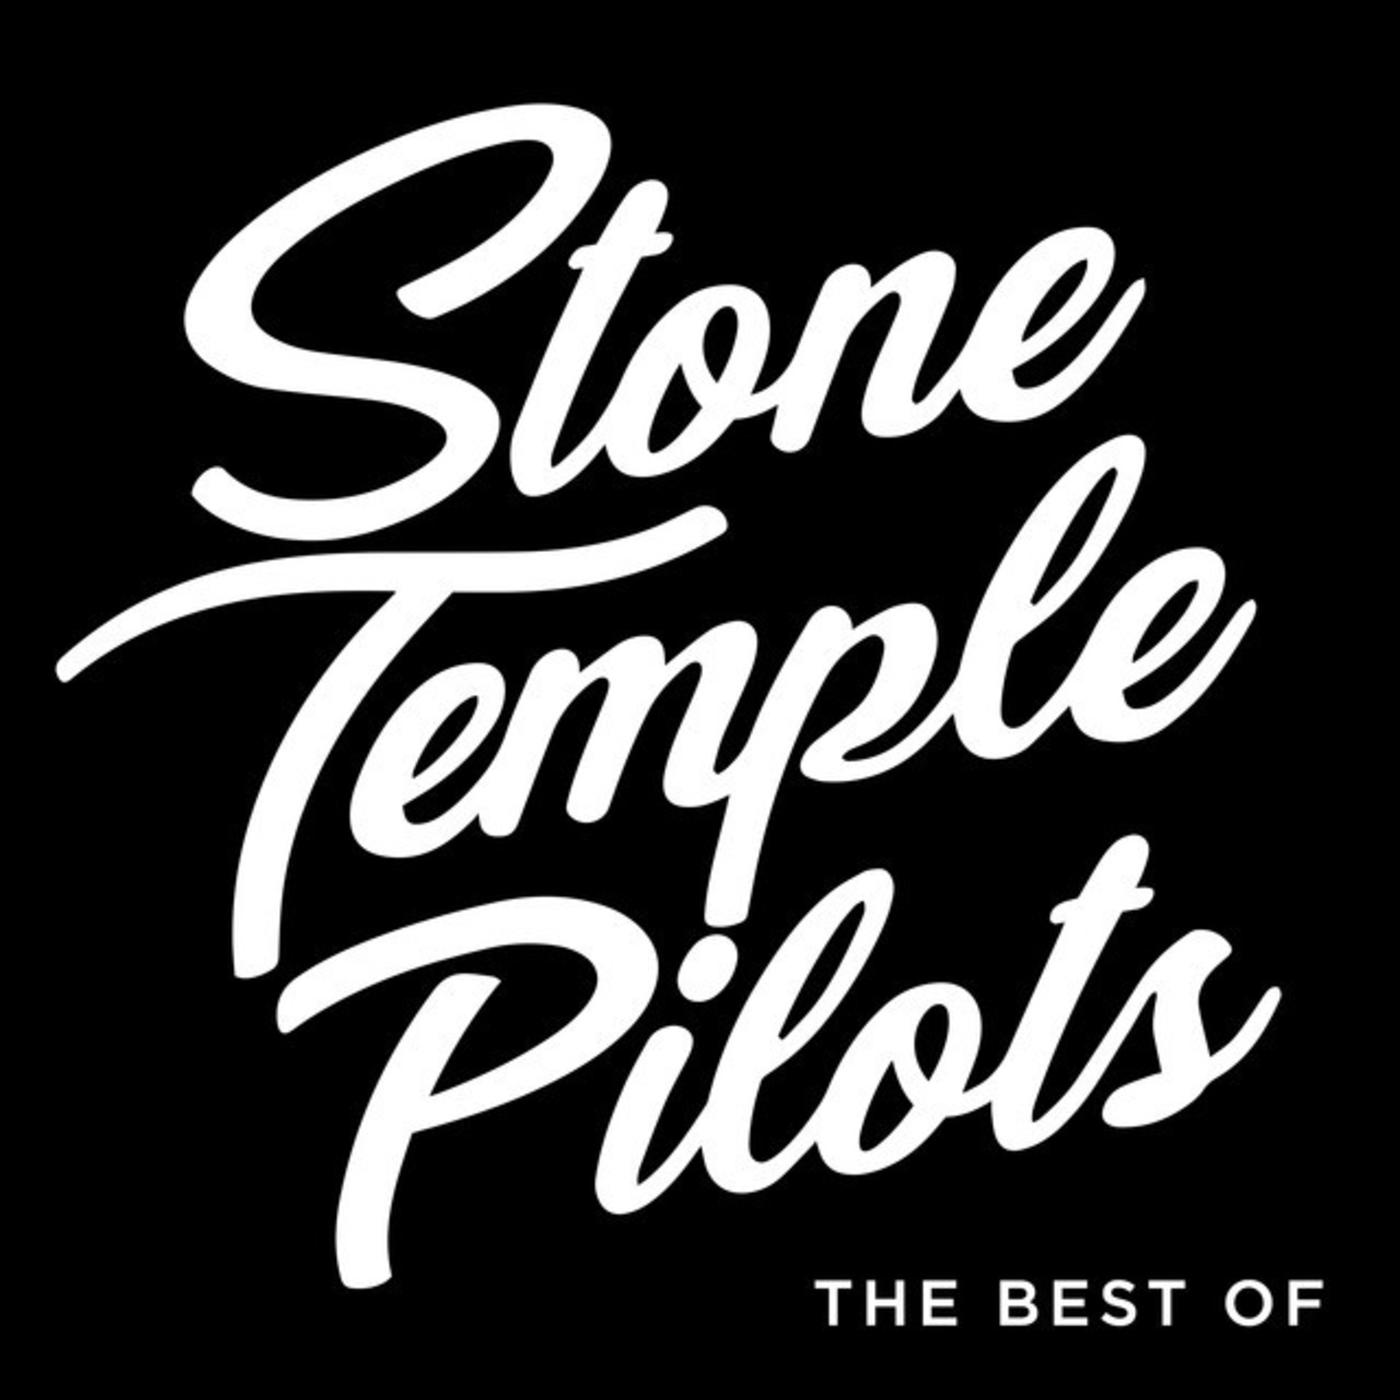 Stone Temple Pilots: The Best Of